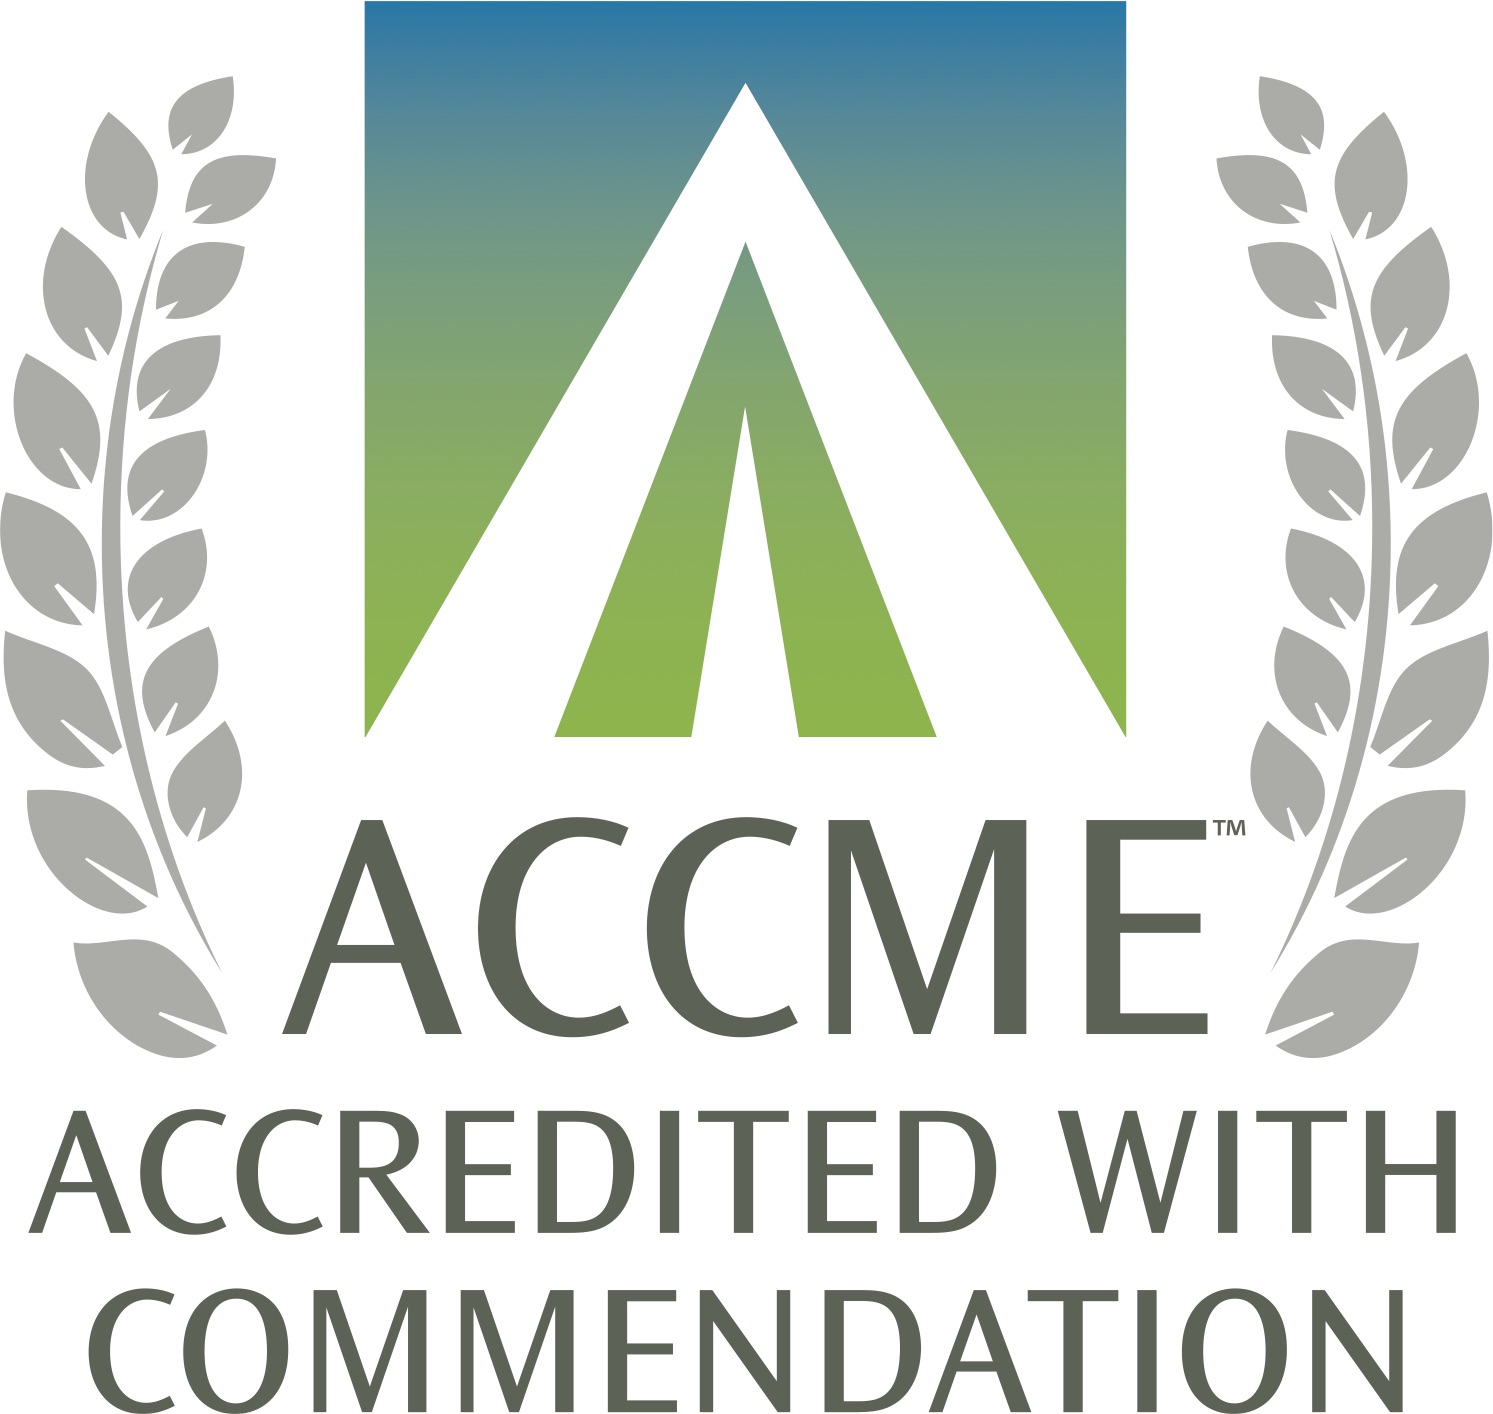 Logo of Accreditation Council for Continuing Medical Education